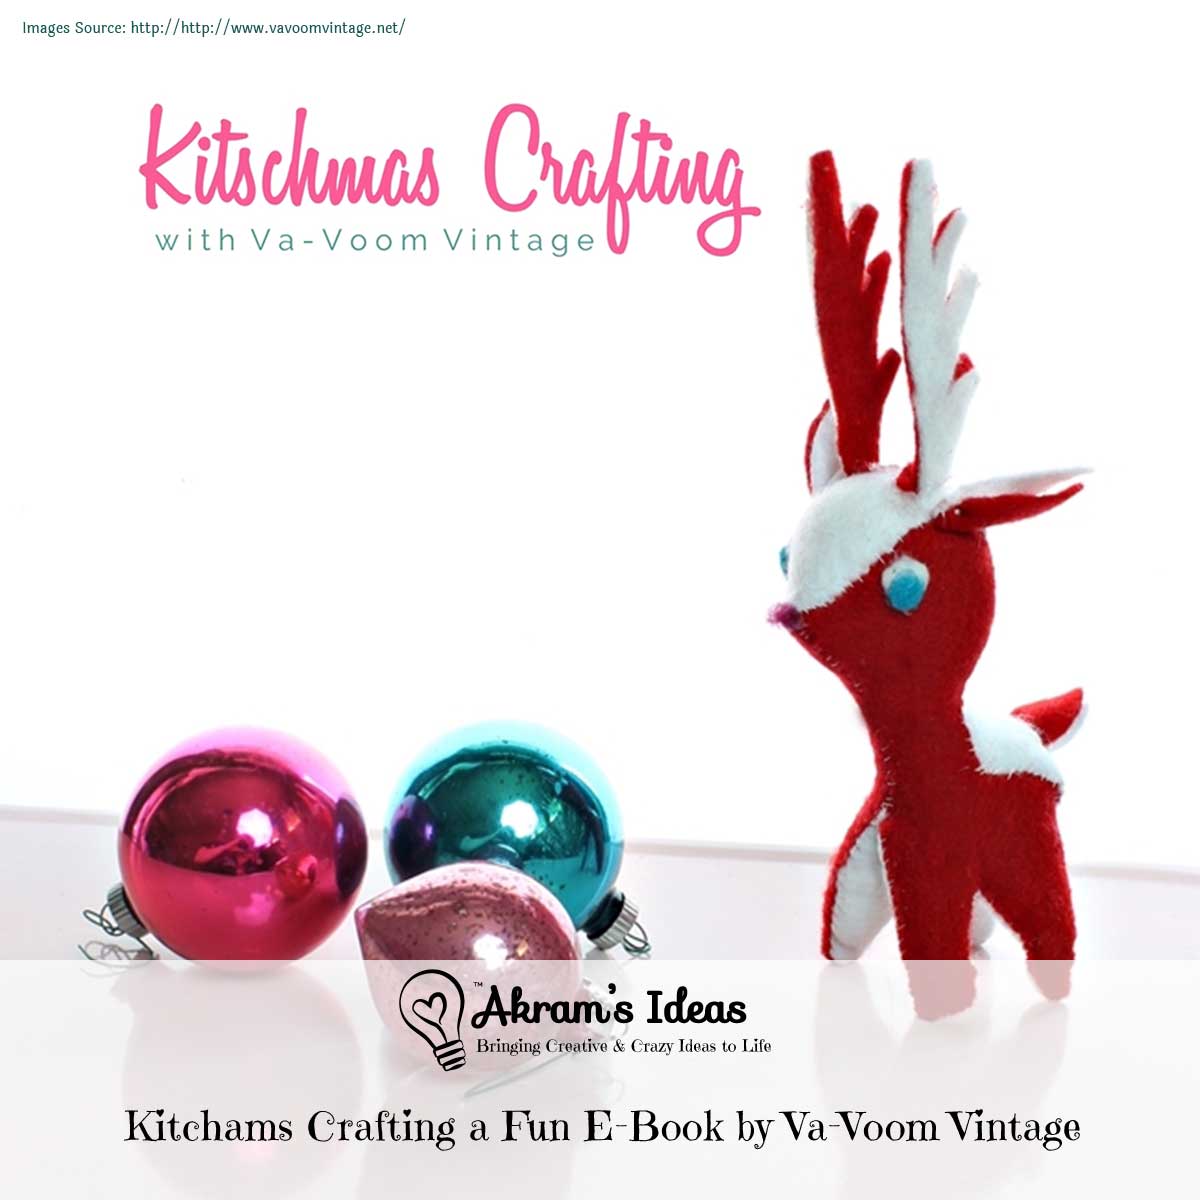 Akram's Ideas : Kitchams Crafting a Fun E-Book by Va-Voom Vintage